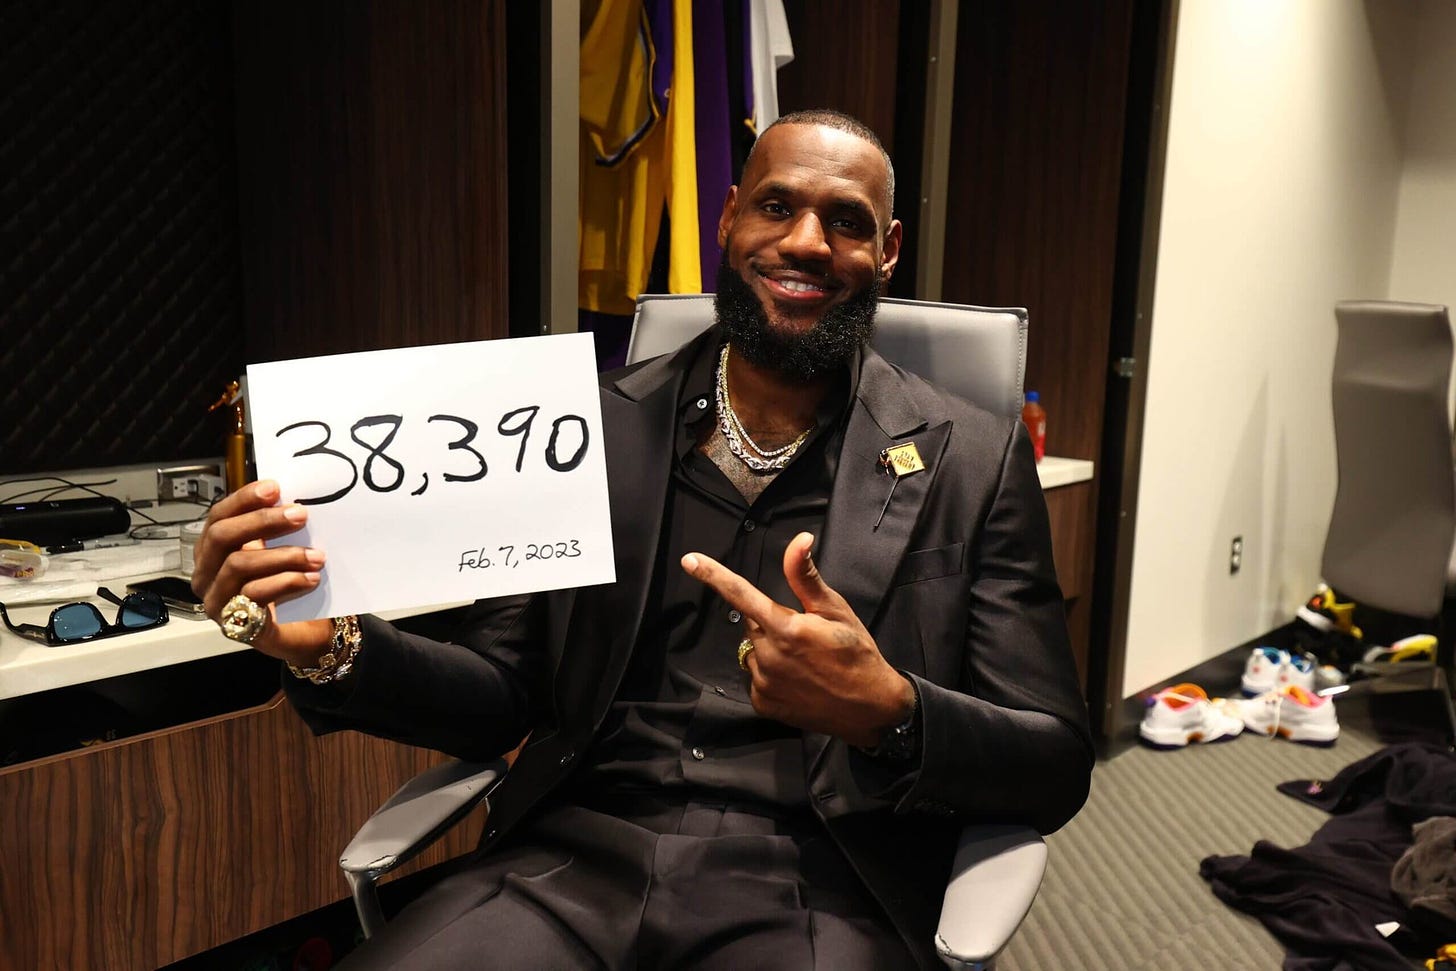 LOS ANGELES, CA - FEBRUARY 7: LeBron James #6 of the Los Angeles Lakers celebrates in the locker room after breaking Kareem Abdul-Jabbars, all time scoring record of 38,387 points against the Oklahoma City Thunder on February 7, 2023 at Crypto.Com Arena in Los Angeles, California. NOTE TO USER: User expressly acknowledges and agrees that, by downloading and/or using this Photograph, user is consenting to the terms and conditions of the Getty Images License Agreement. Mandatory Copyright Notice: Copyright 2023 NBAE (Photo by Nathaniel S. Butler/NBAE via Getty Images)